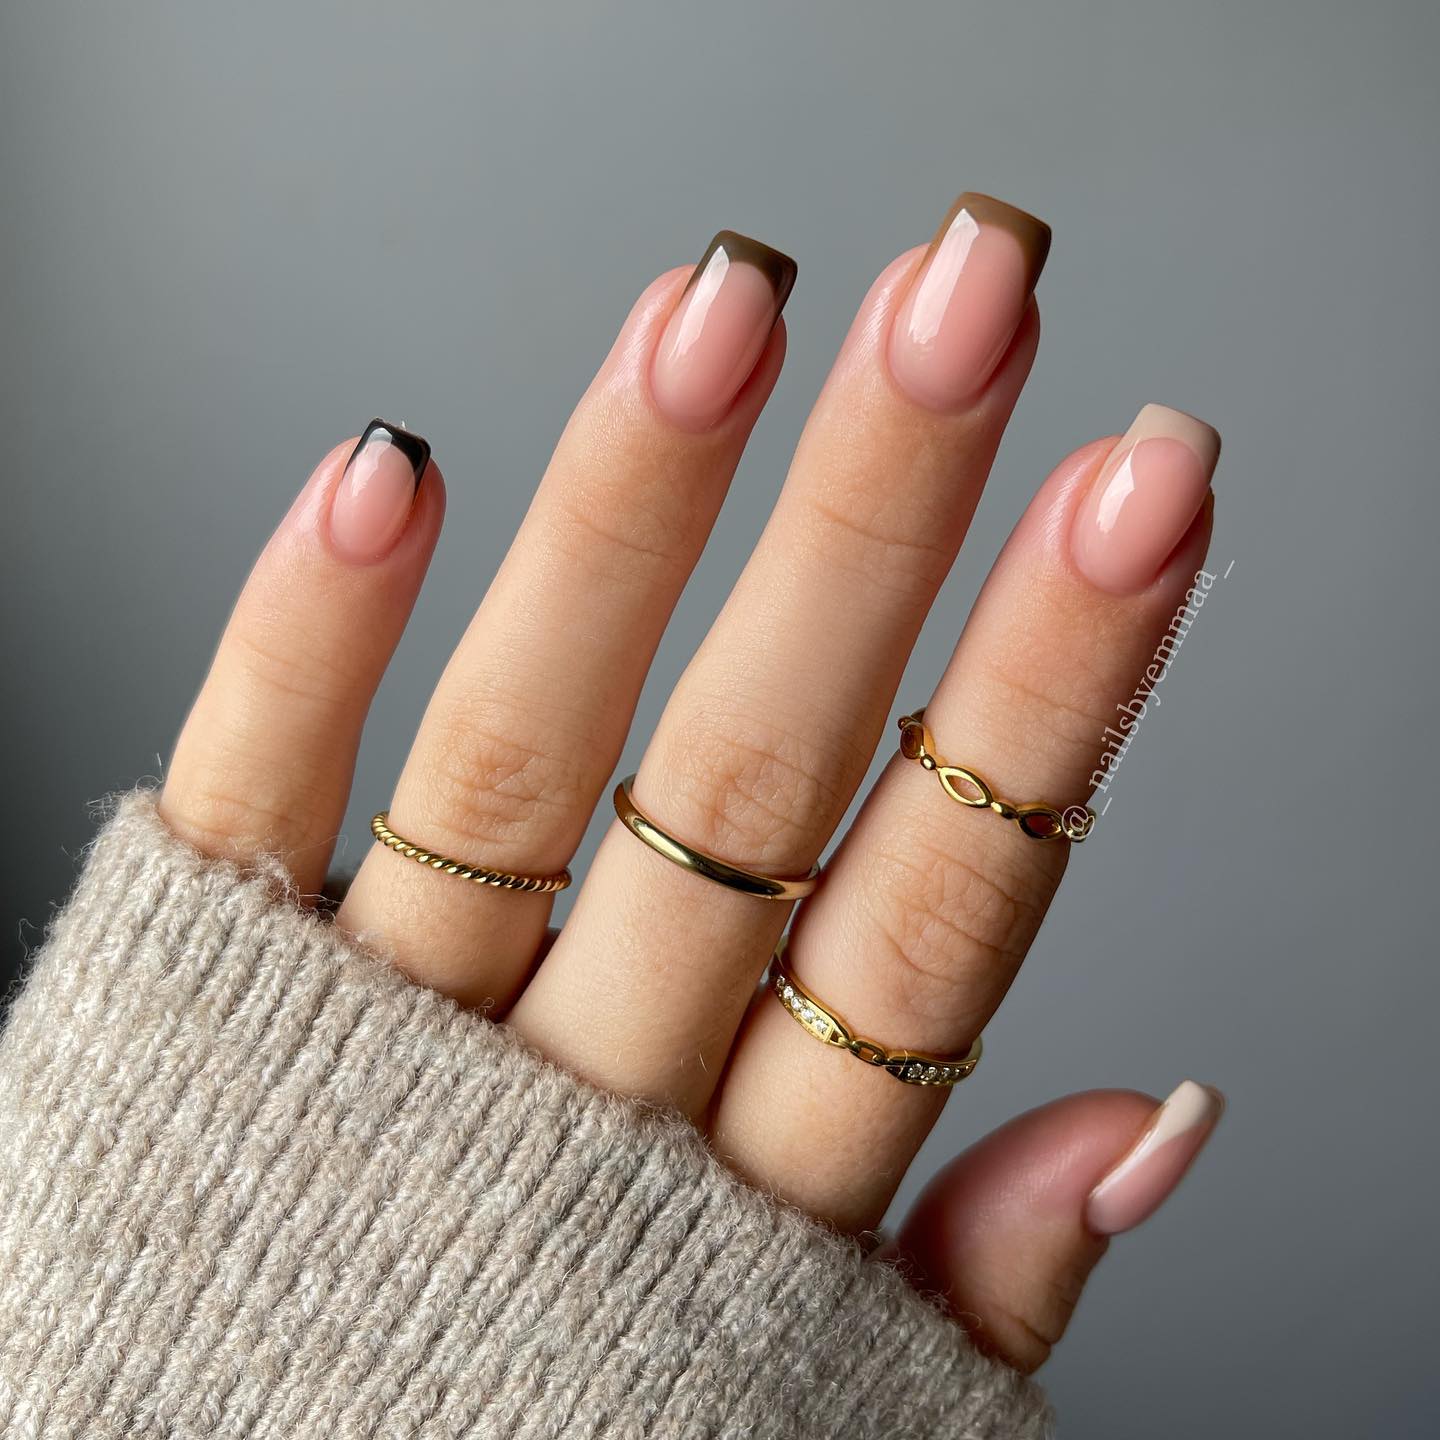 Short Square Nails with Brown French Tips